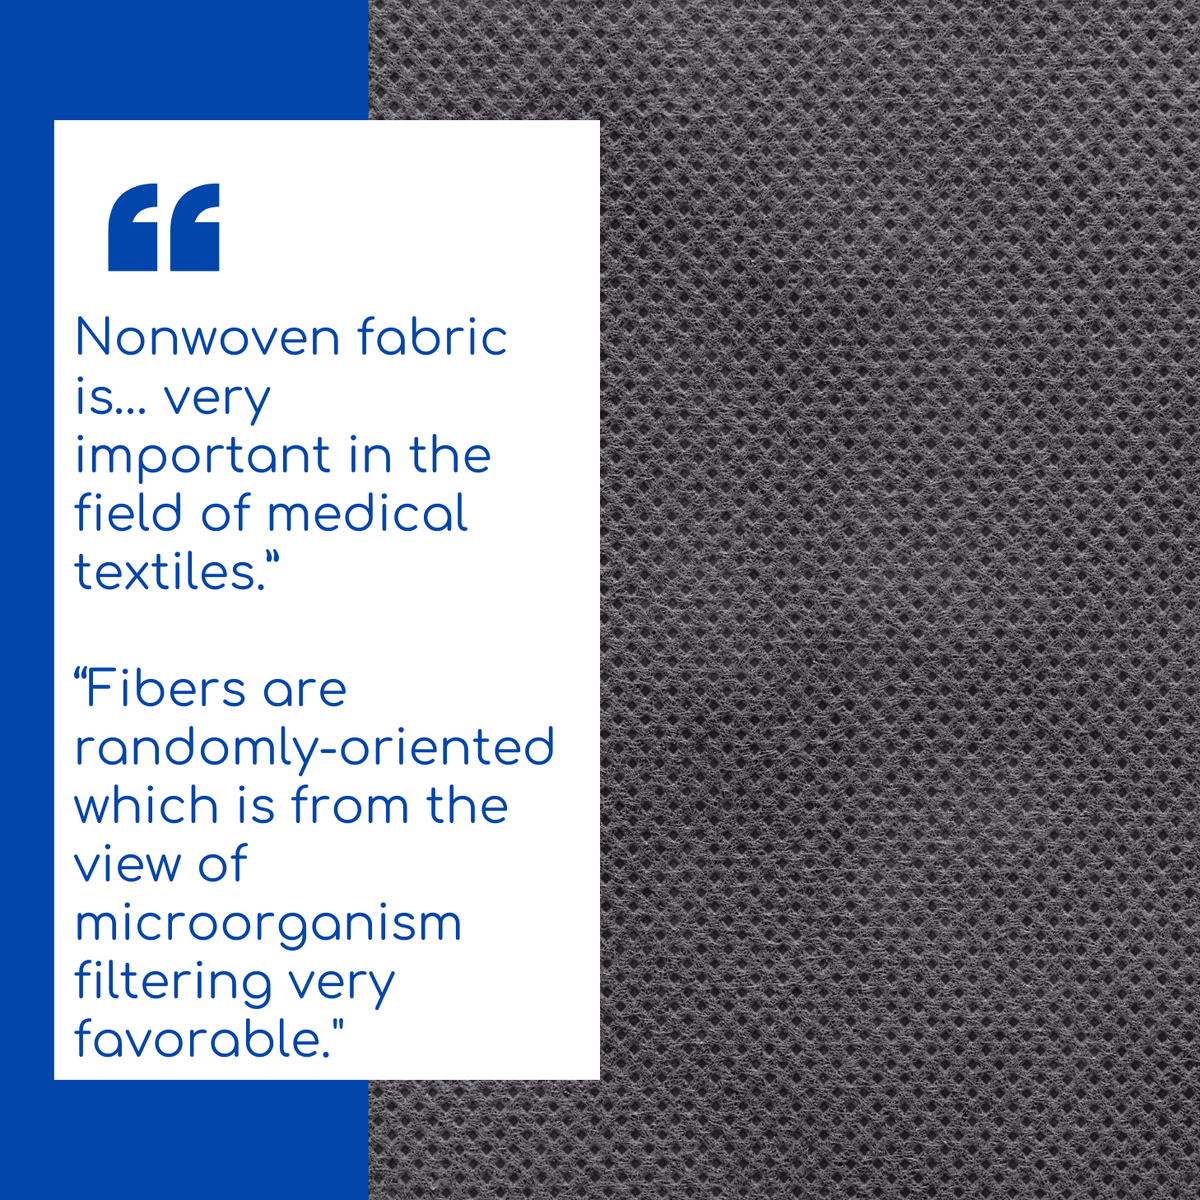 “Nonwoven fabric is… very important in the field of medical textiles.” “fibers are randomly-oriented which is from the view of microorganism filtering very favorable.”